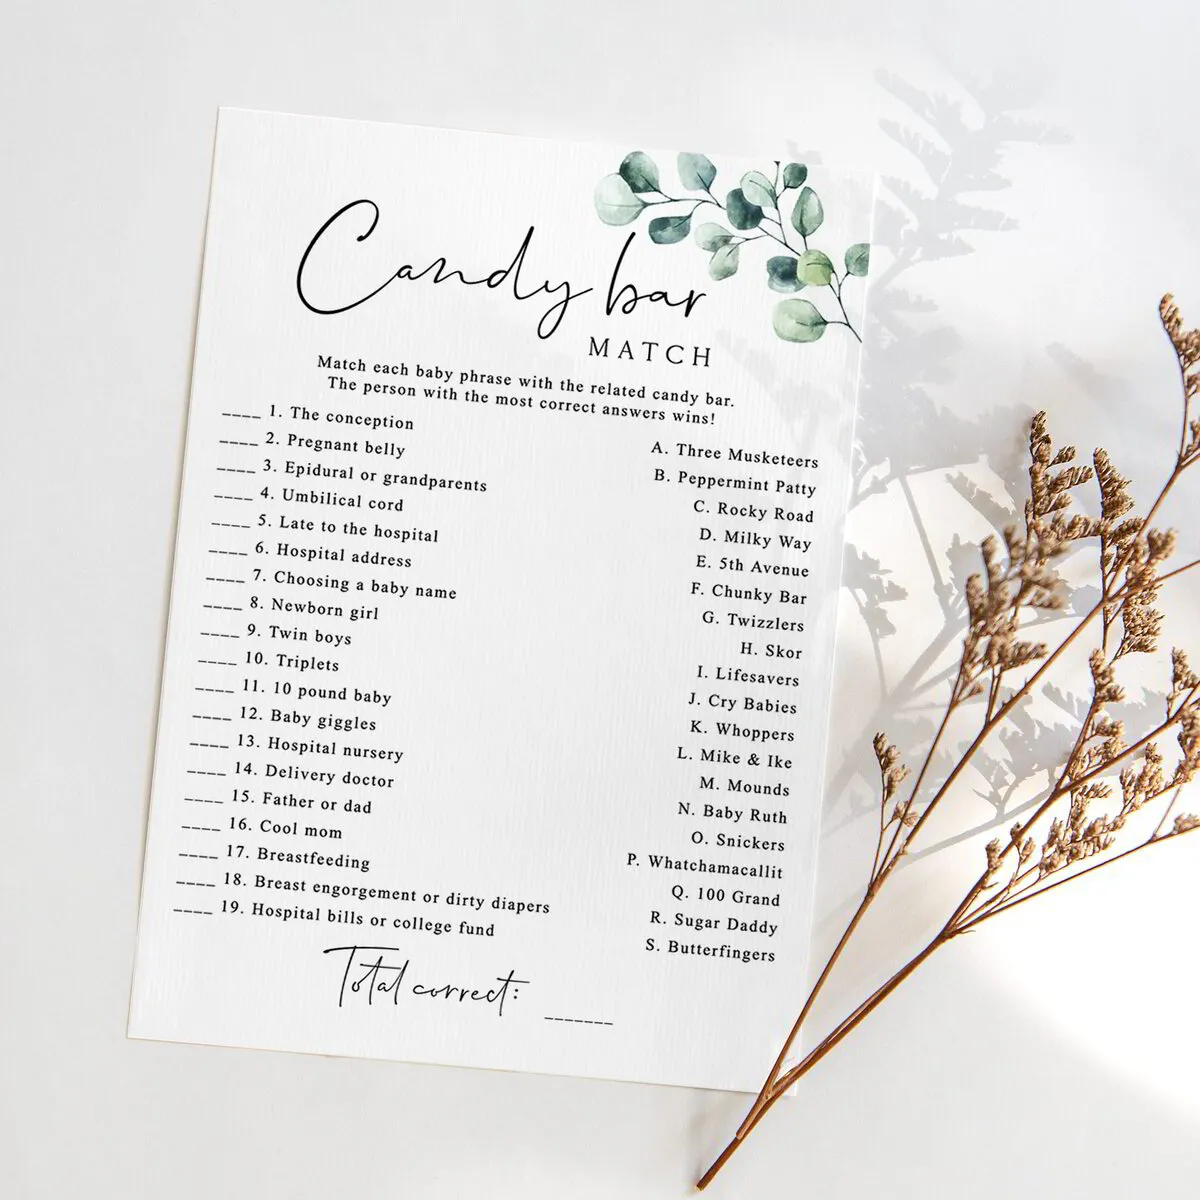 Printable Candy Bar Match baby shower game